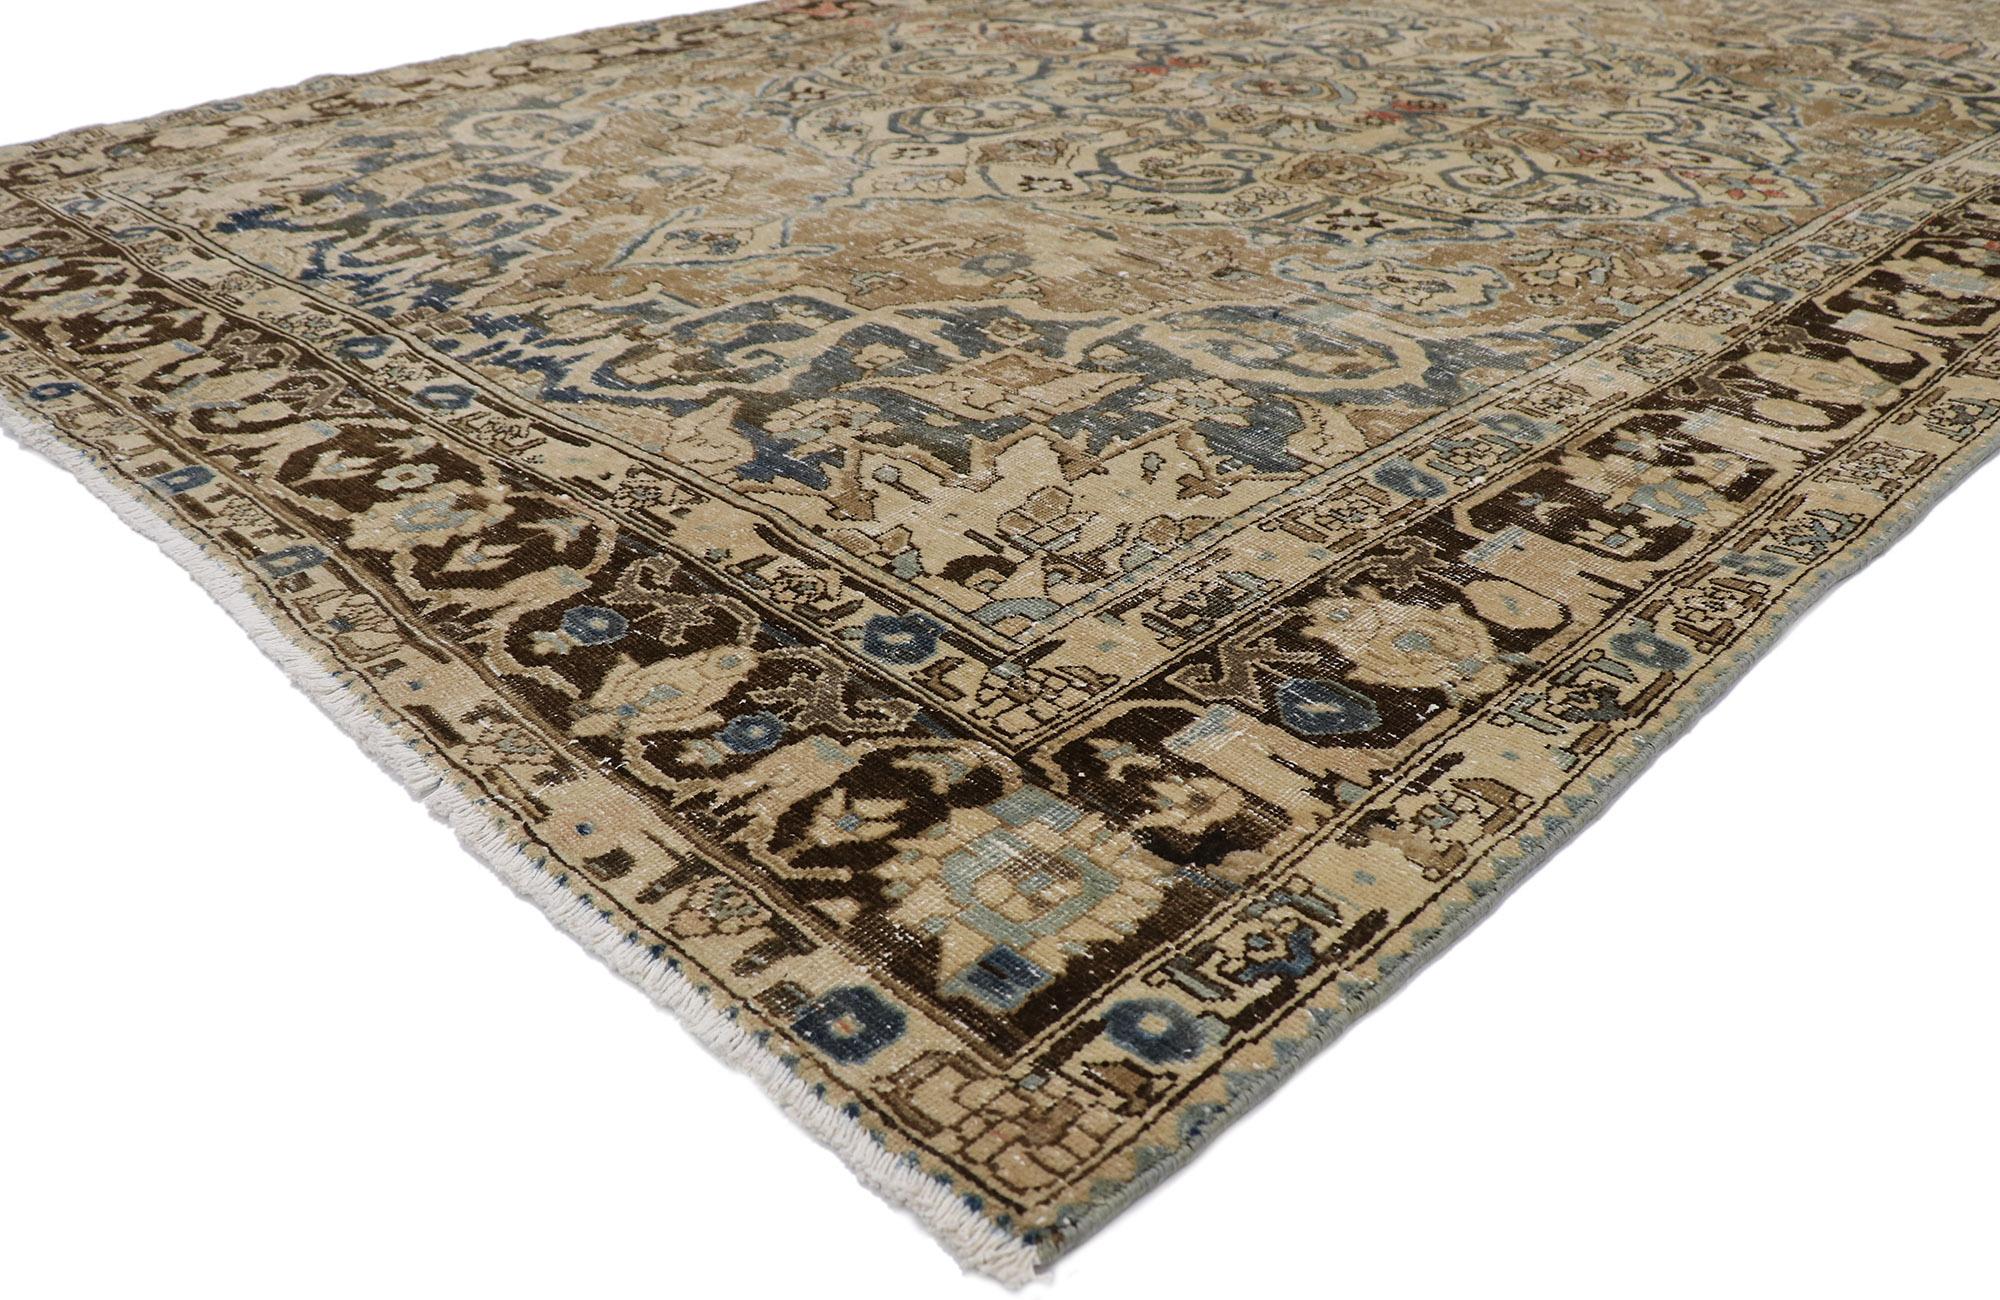 60935 distressed antique Persian Heriz rug with Mid-Century Modern style 08'03 x 11'11. Warm and inviting with Mid-Century Modern style, this hand-knotted wool distressed antique Persian Heriz rug features a large round center medallion anchored